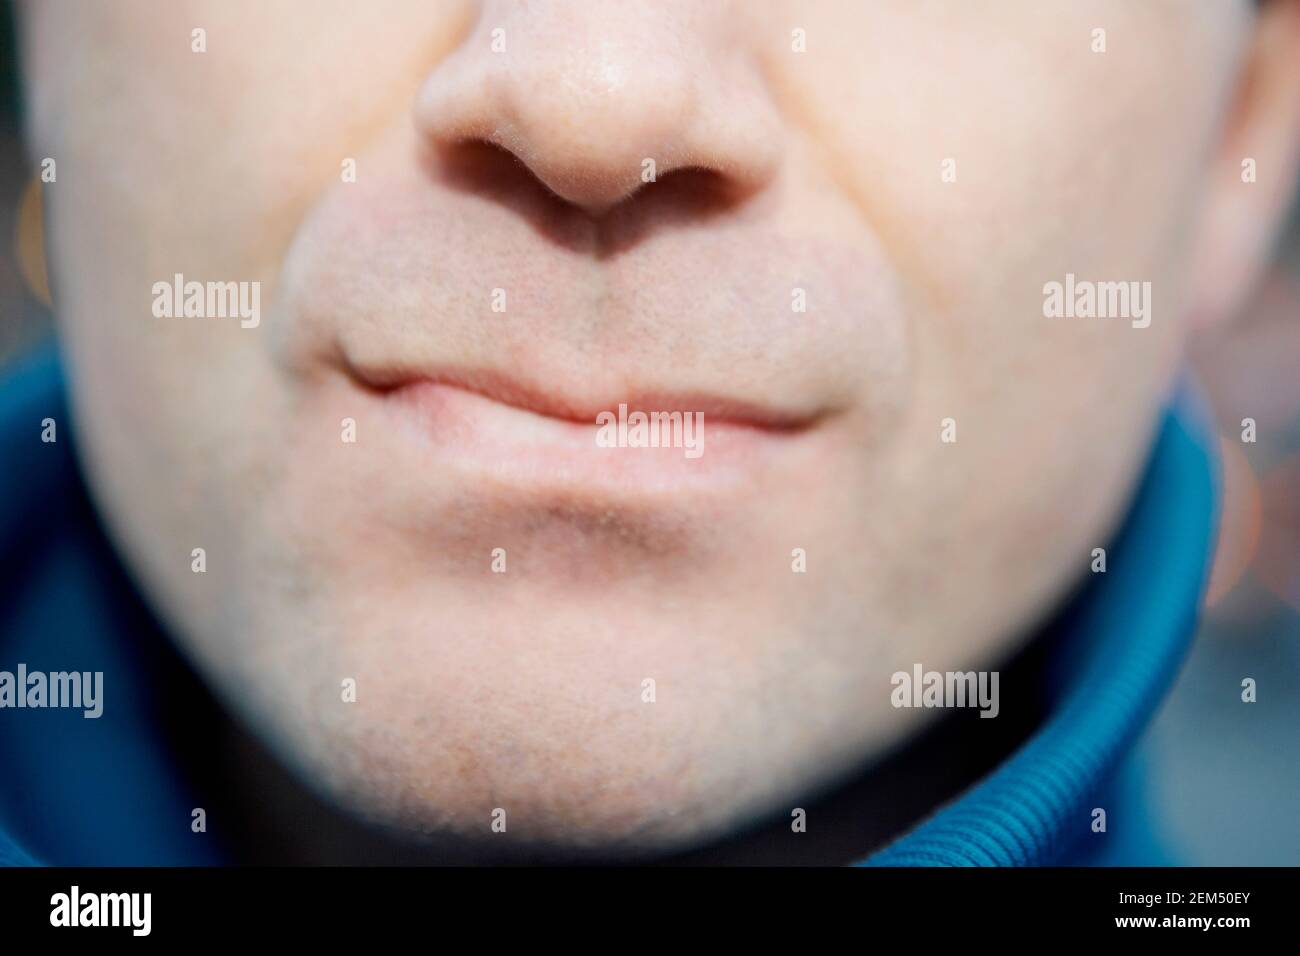 Close-up of a human mouth Stock Photo